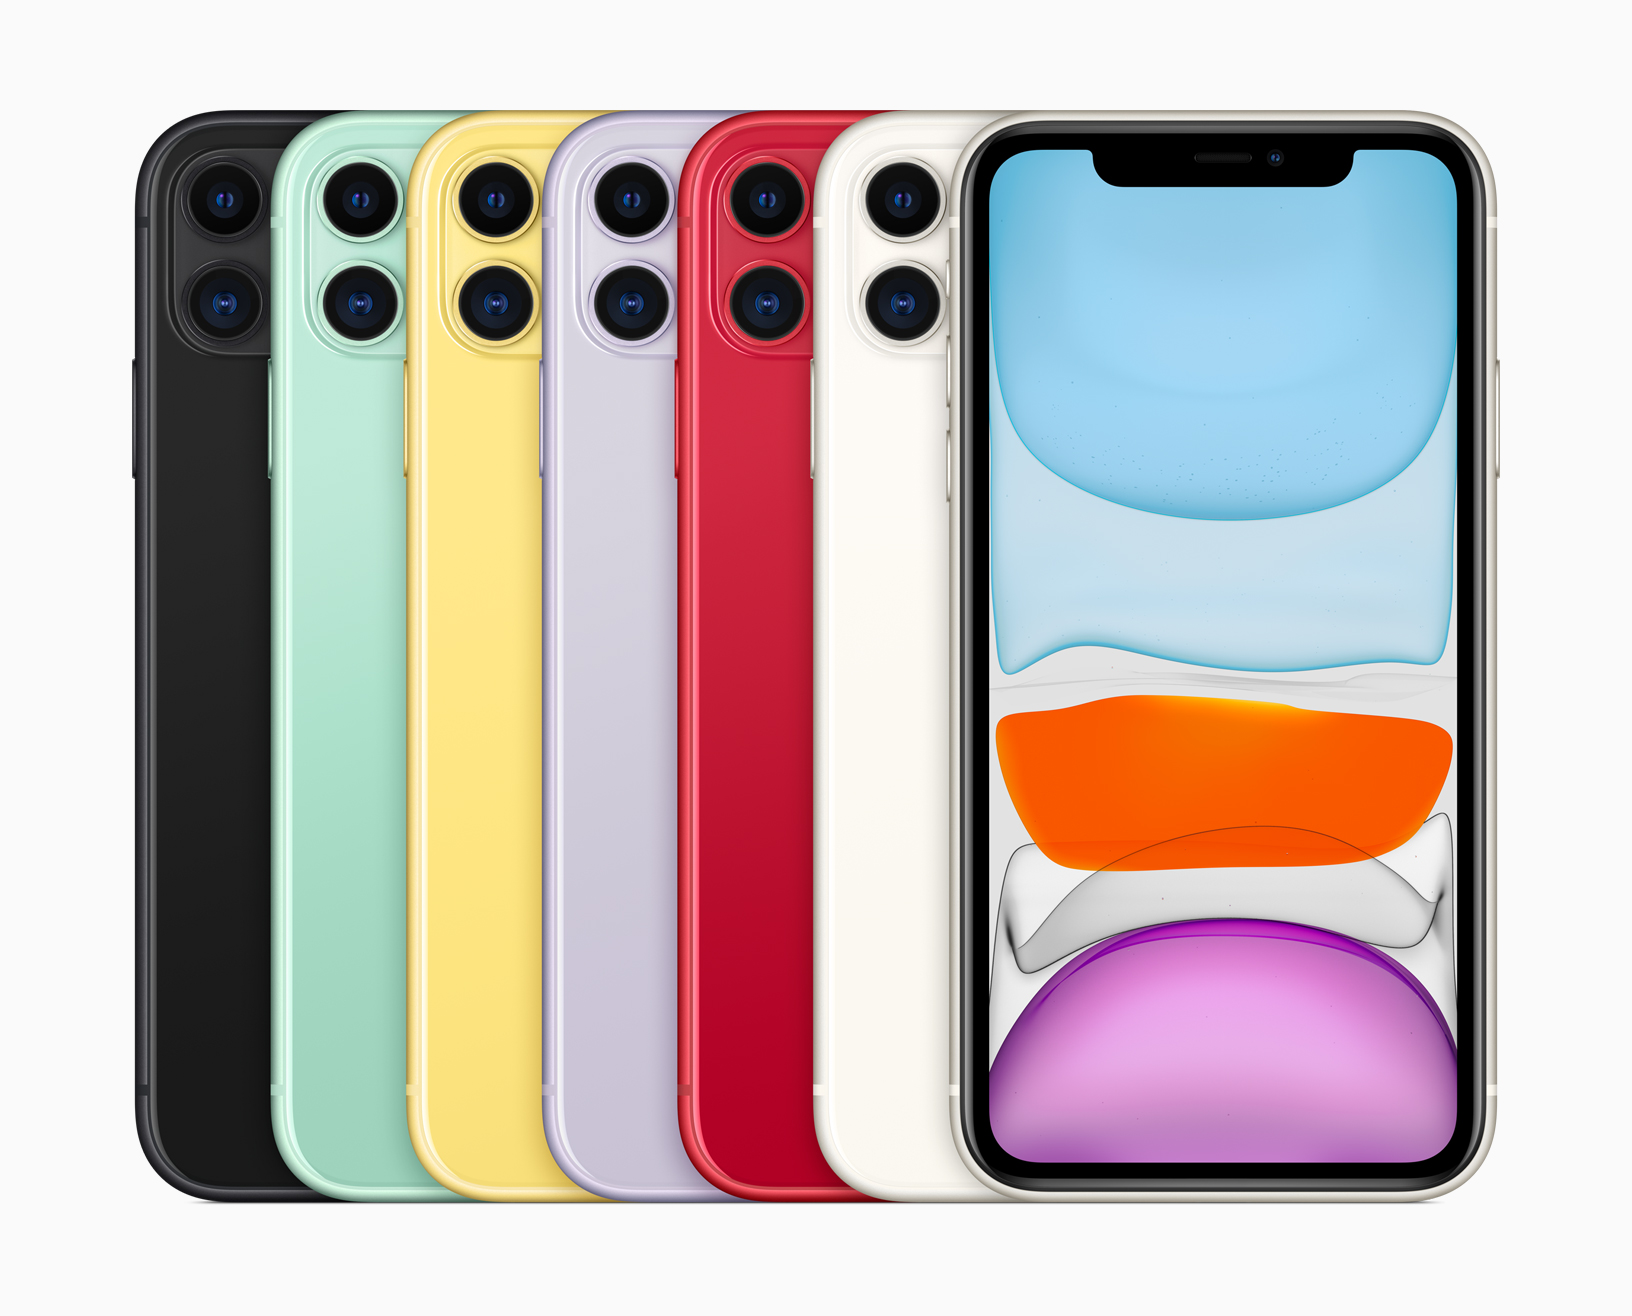 Apple iphone 11 family lineup 091019 63695